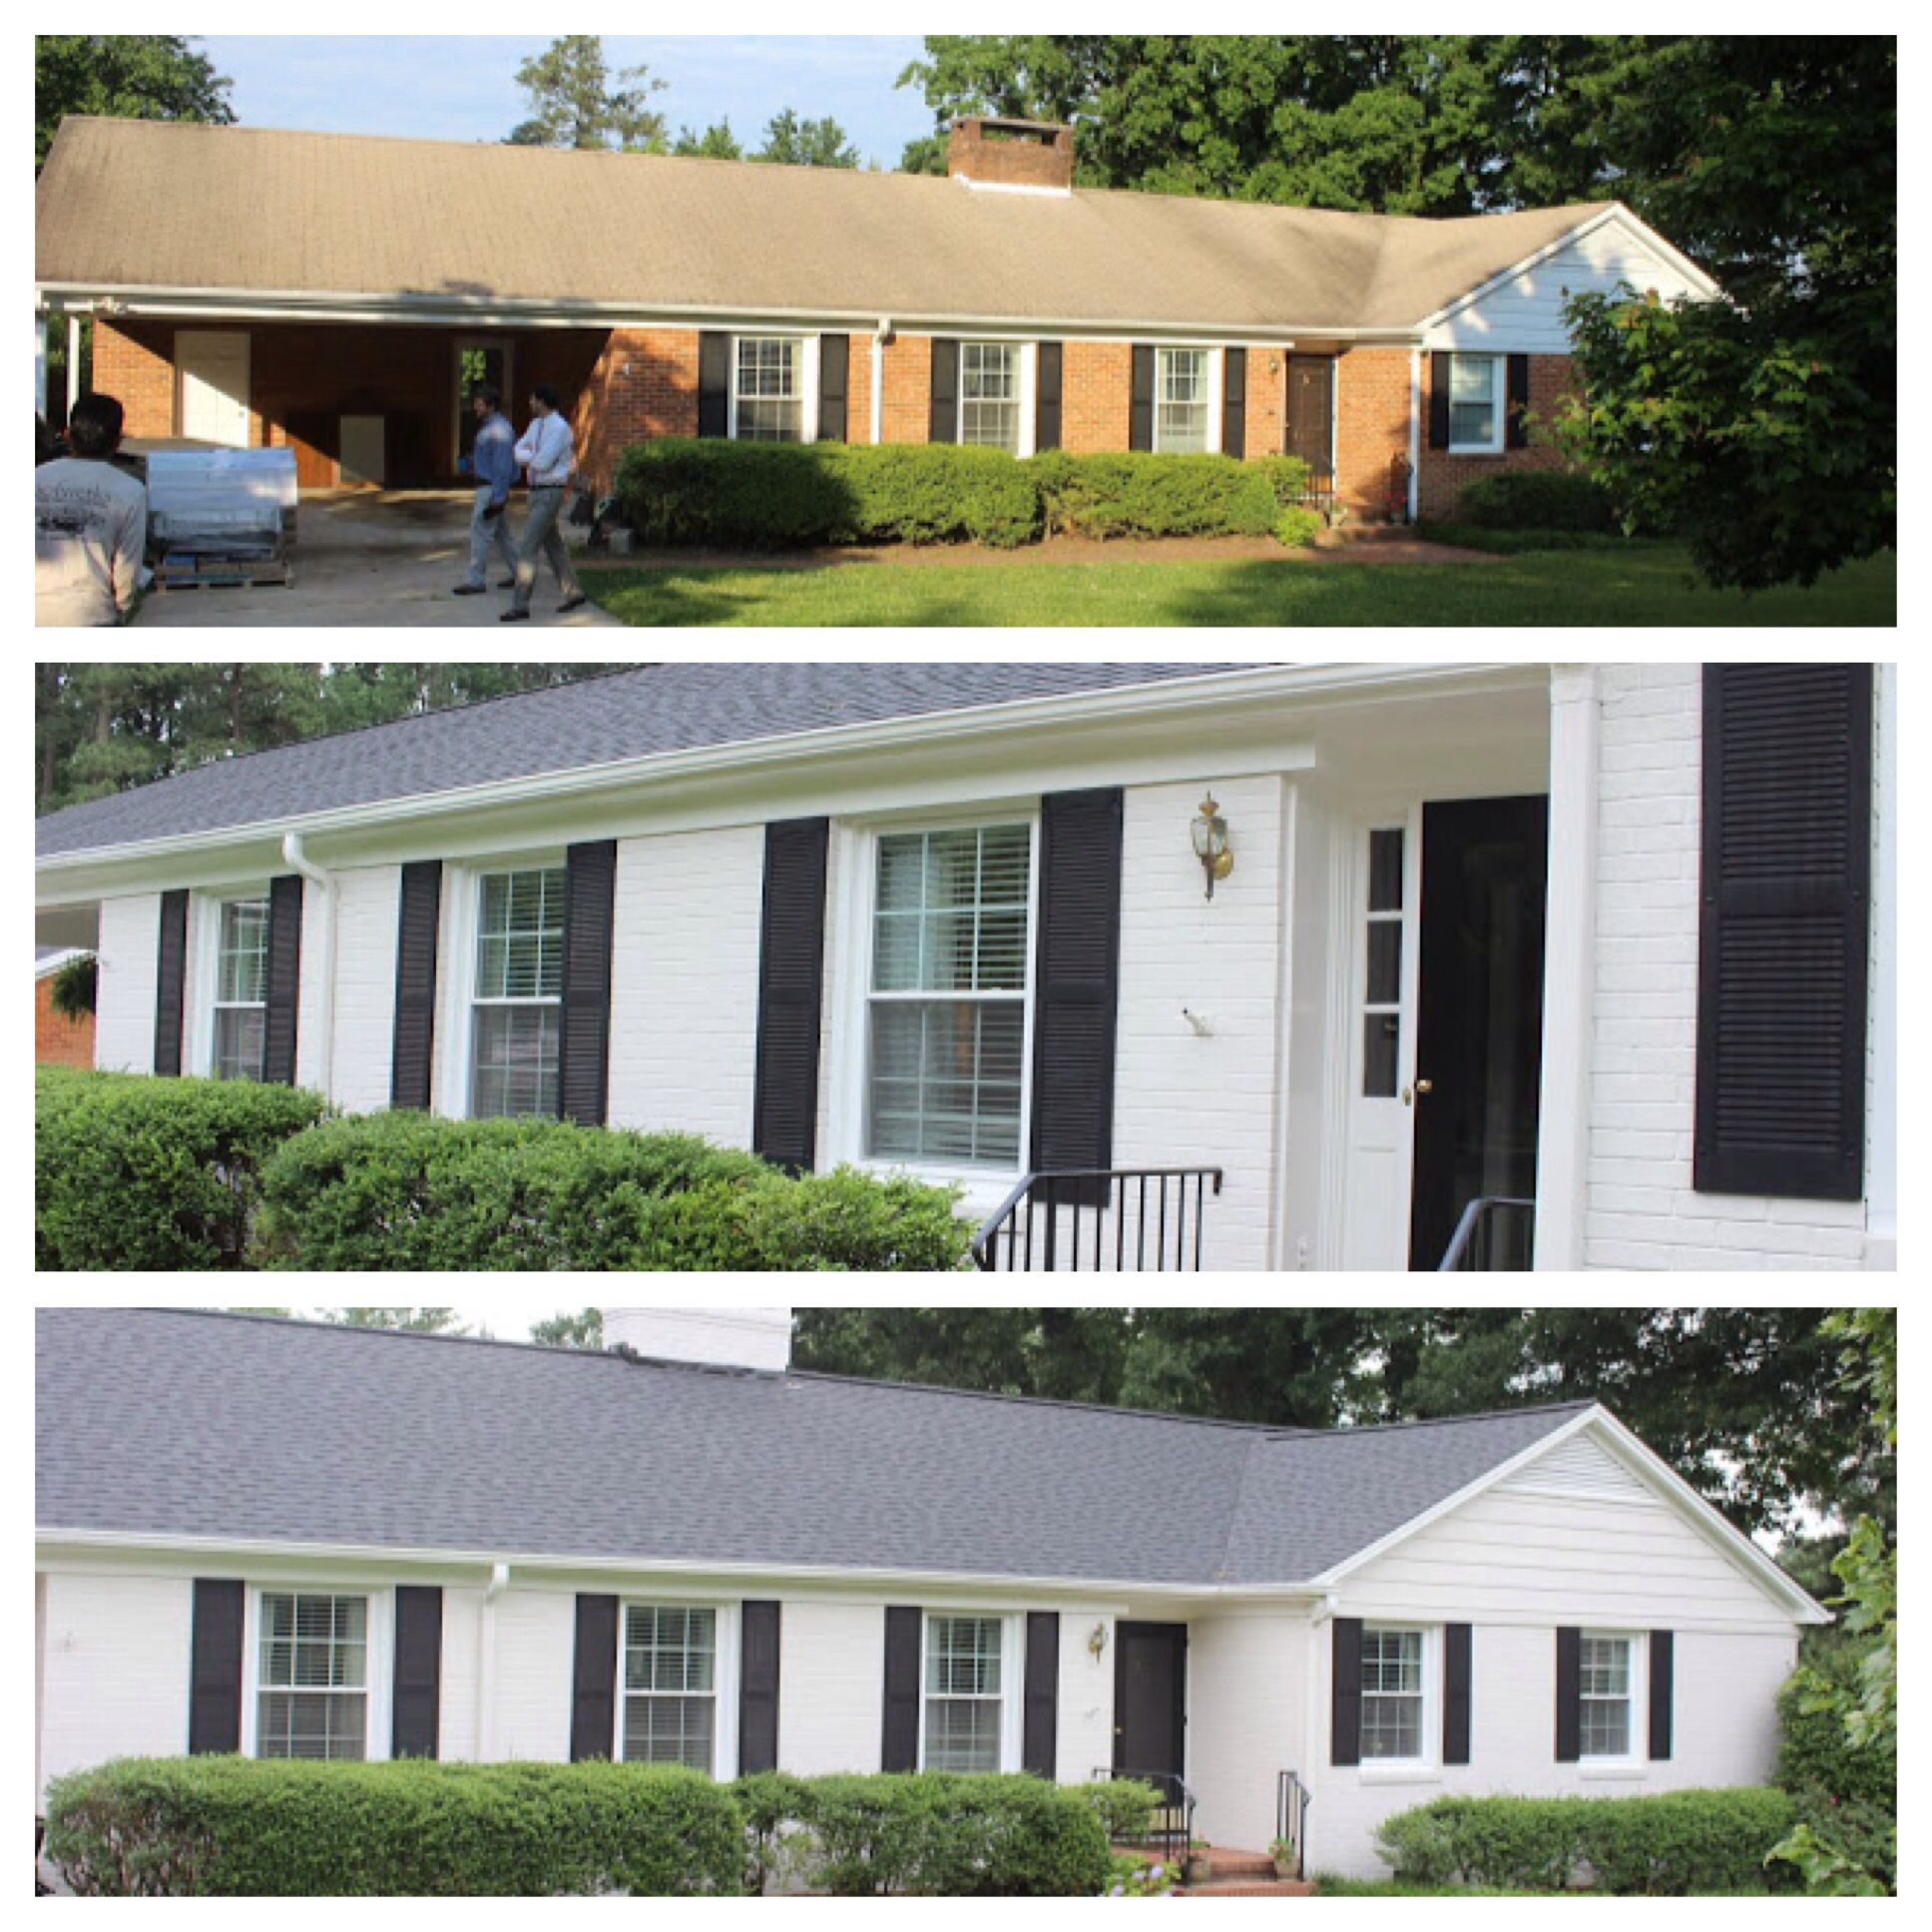 Curb appeal before and after. Paint brick house white. Adds interest ...